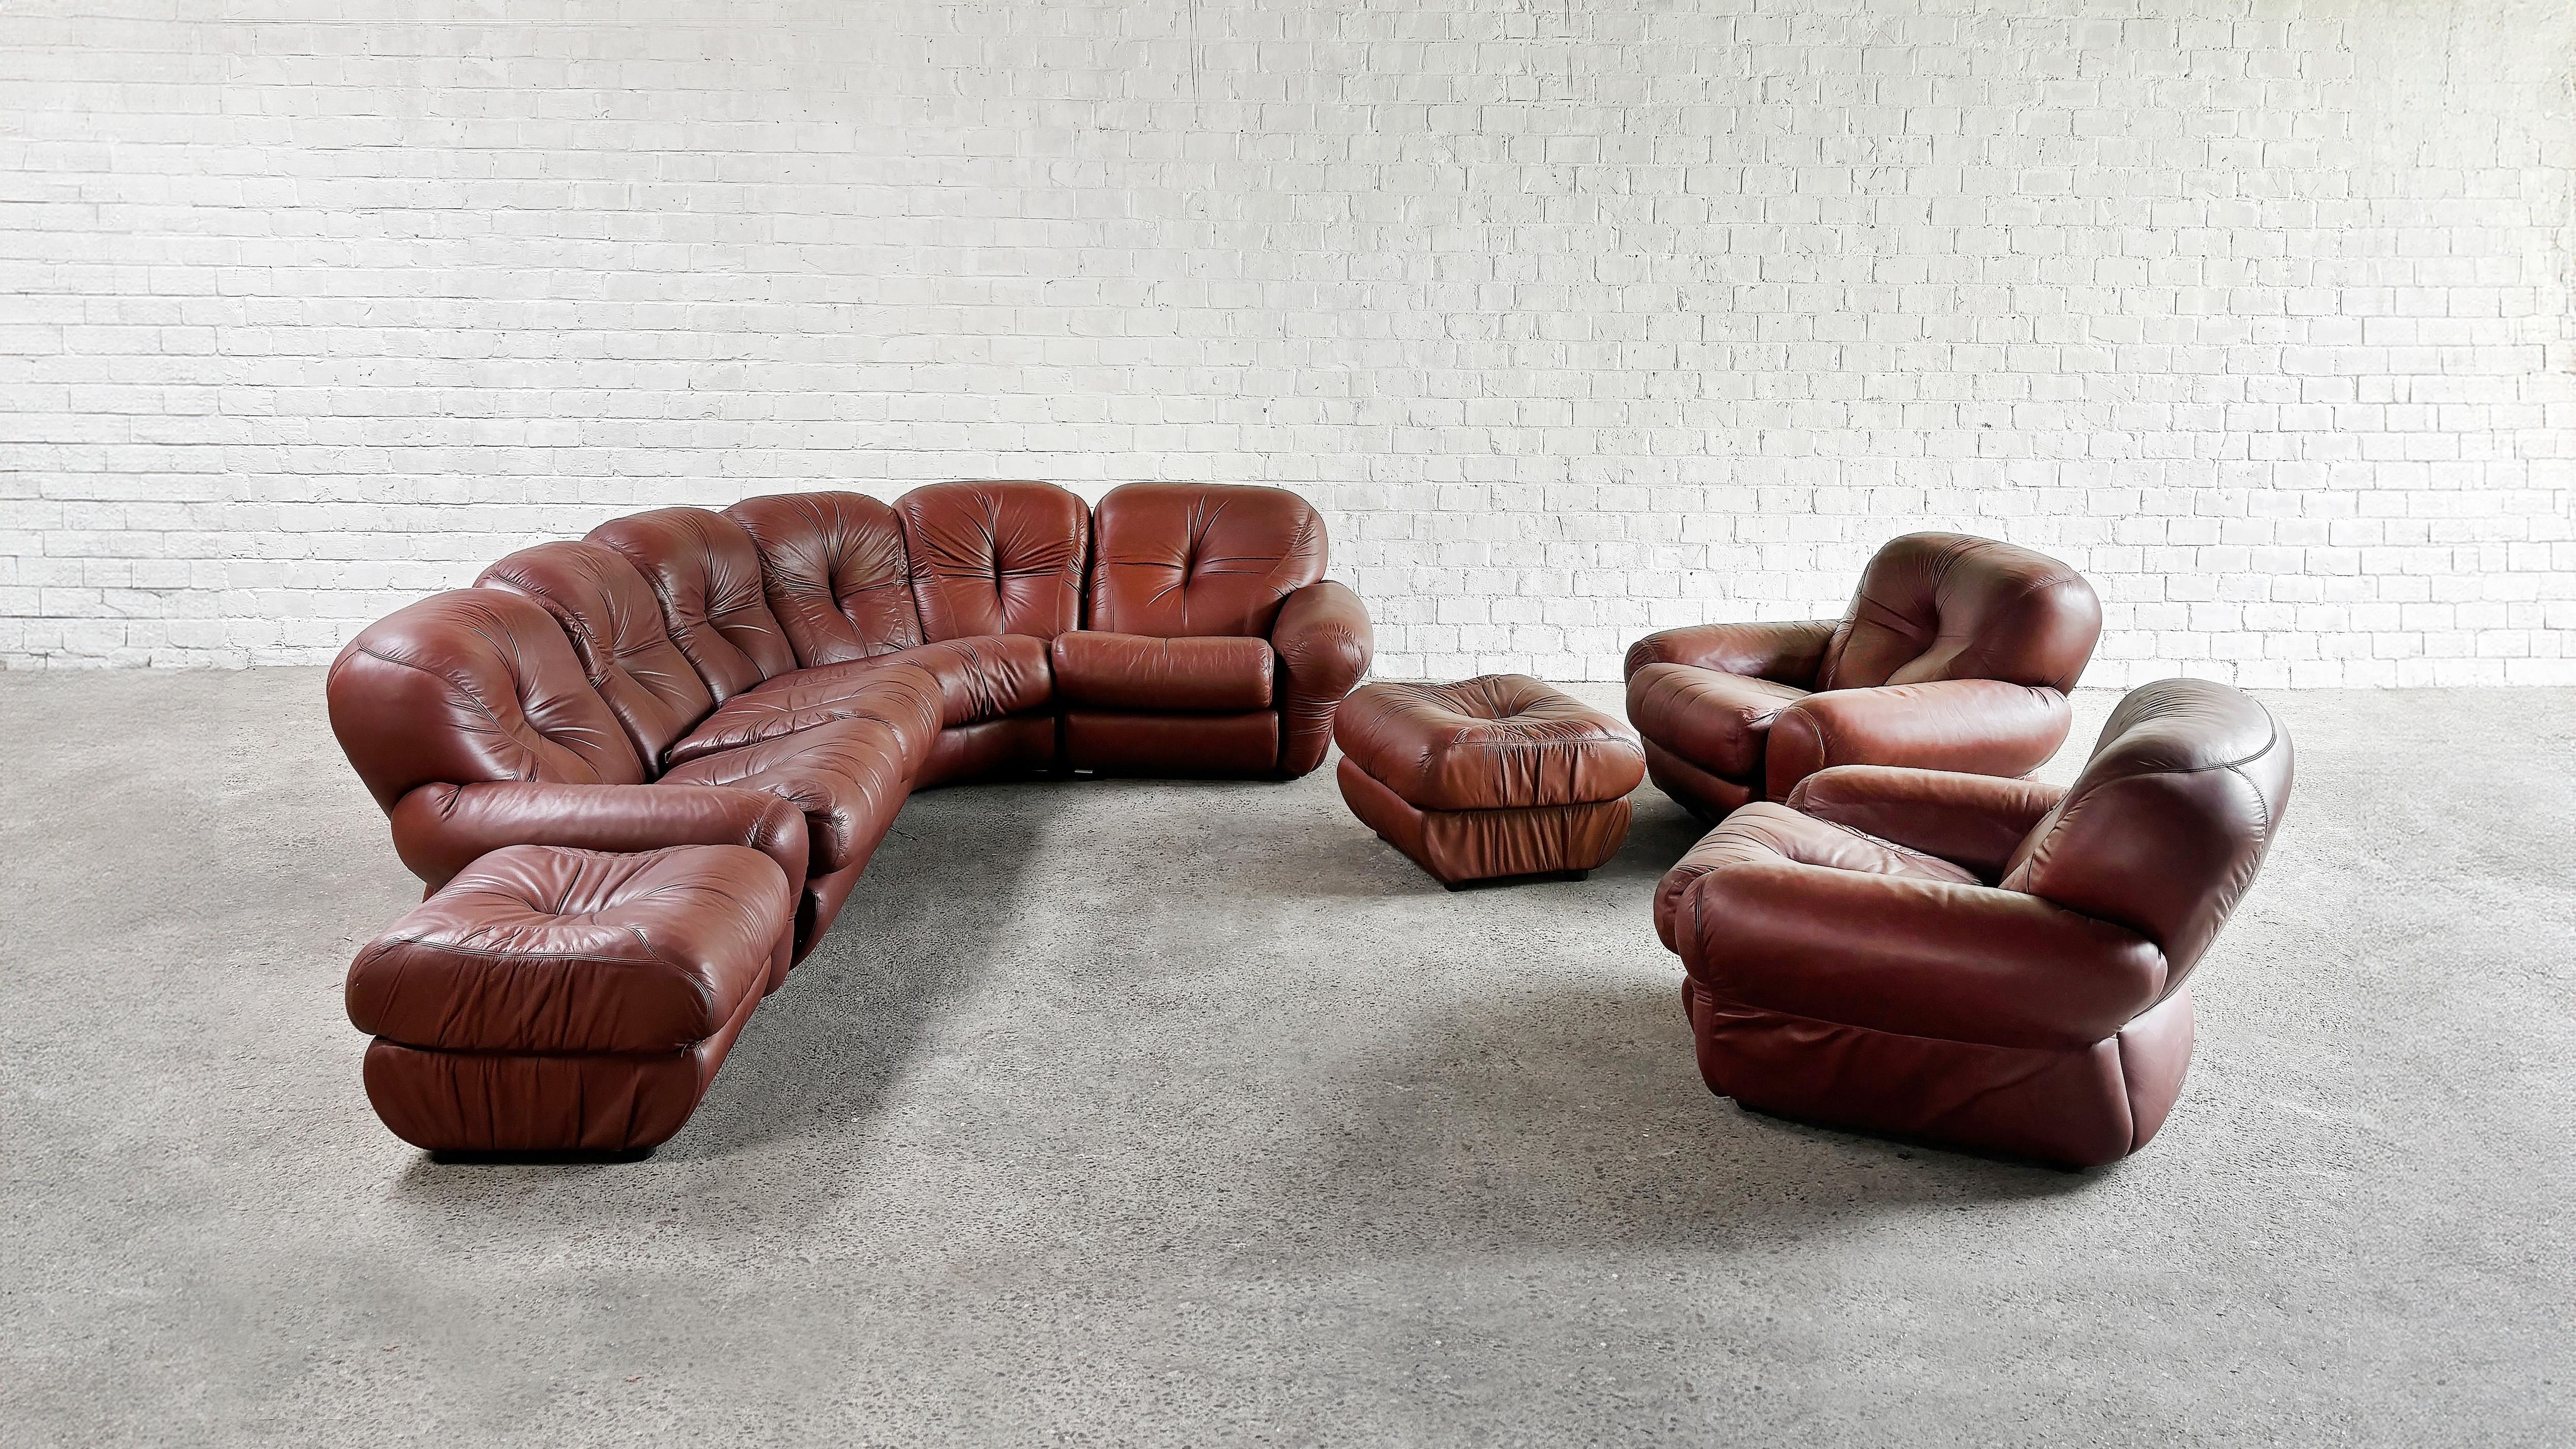 A large Italian modular sofa consisting of eight individual big and fluffy pieces. This sofa was made is the 1970’s and sits extremely comfortable. Its rounded lines and shapes lend a softened aesthetic typical of 1970s Italian modernism, creating